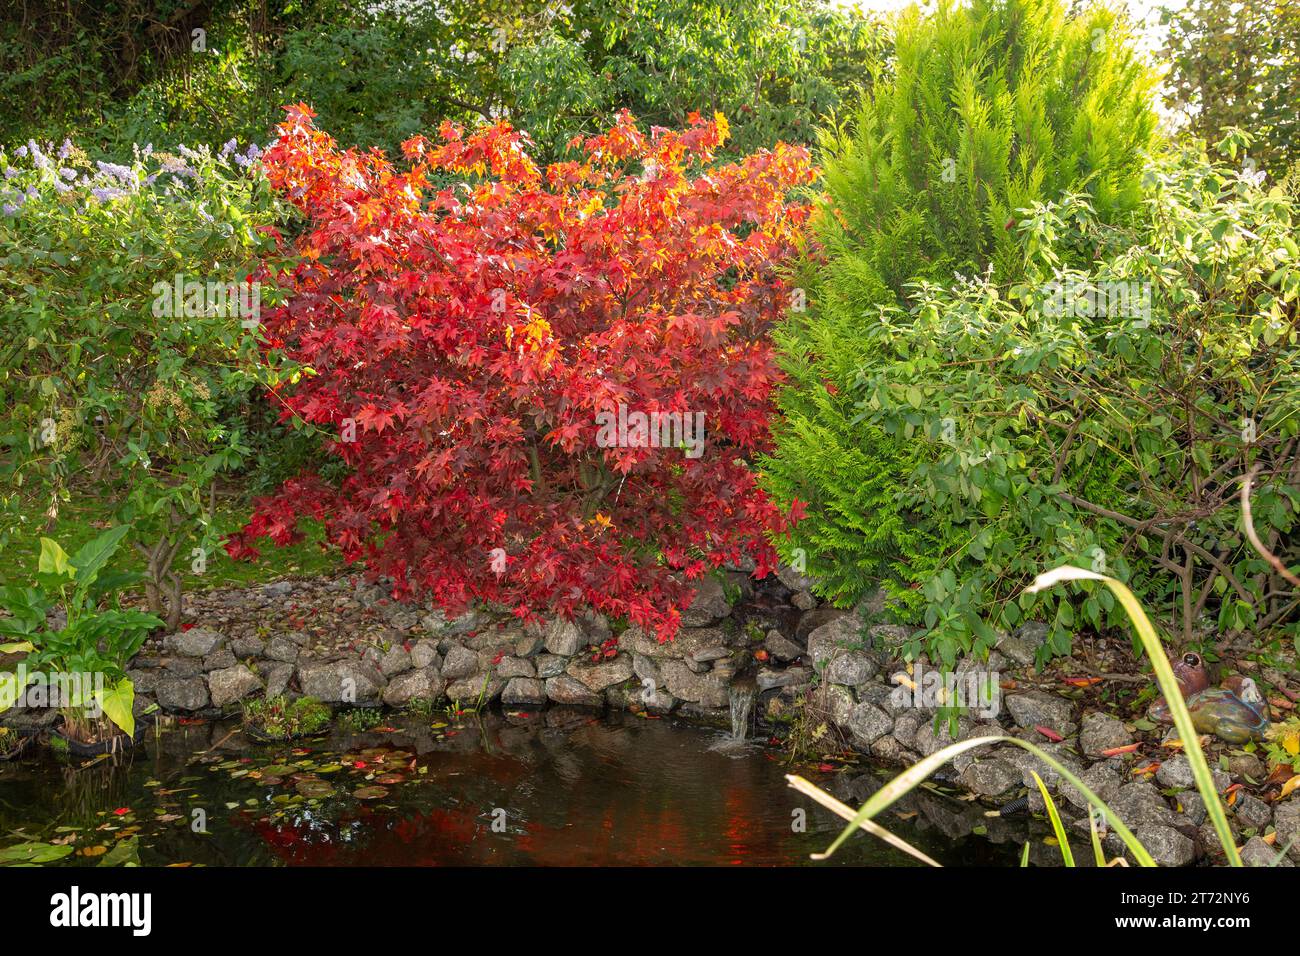 Autumn colour at a garden pond with Acer palmatum Osakazuki with (L) late flowers of ceanothus Gloire de Versailles and R) an evergreen Thuja Stock Photo